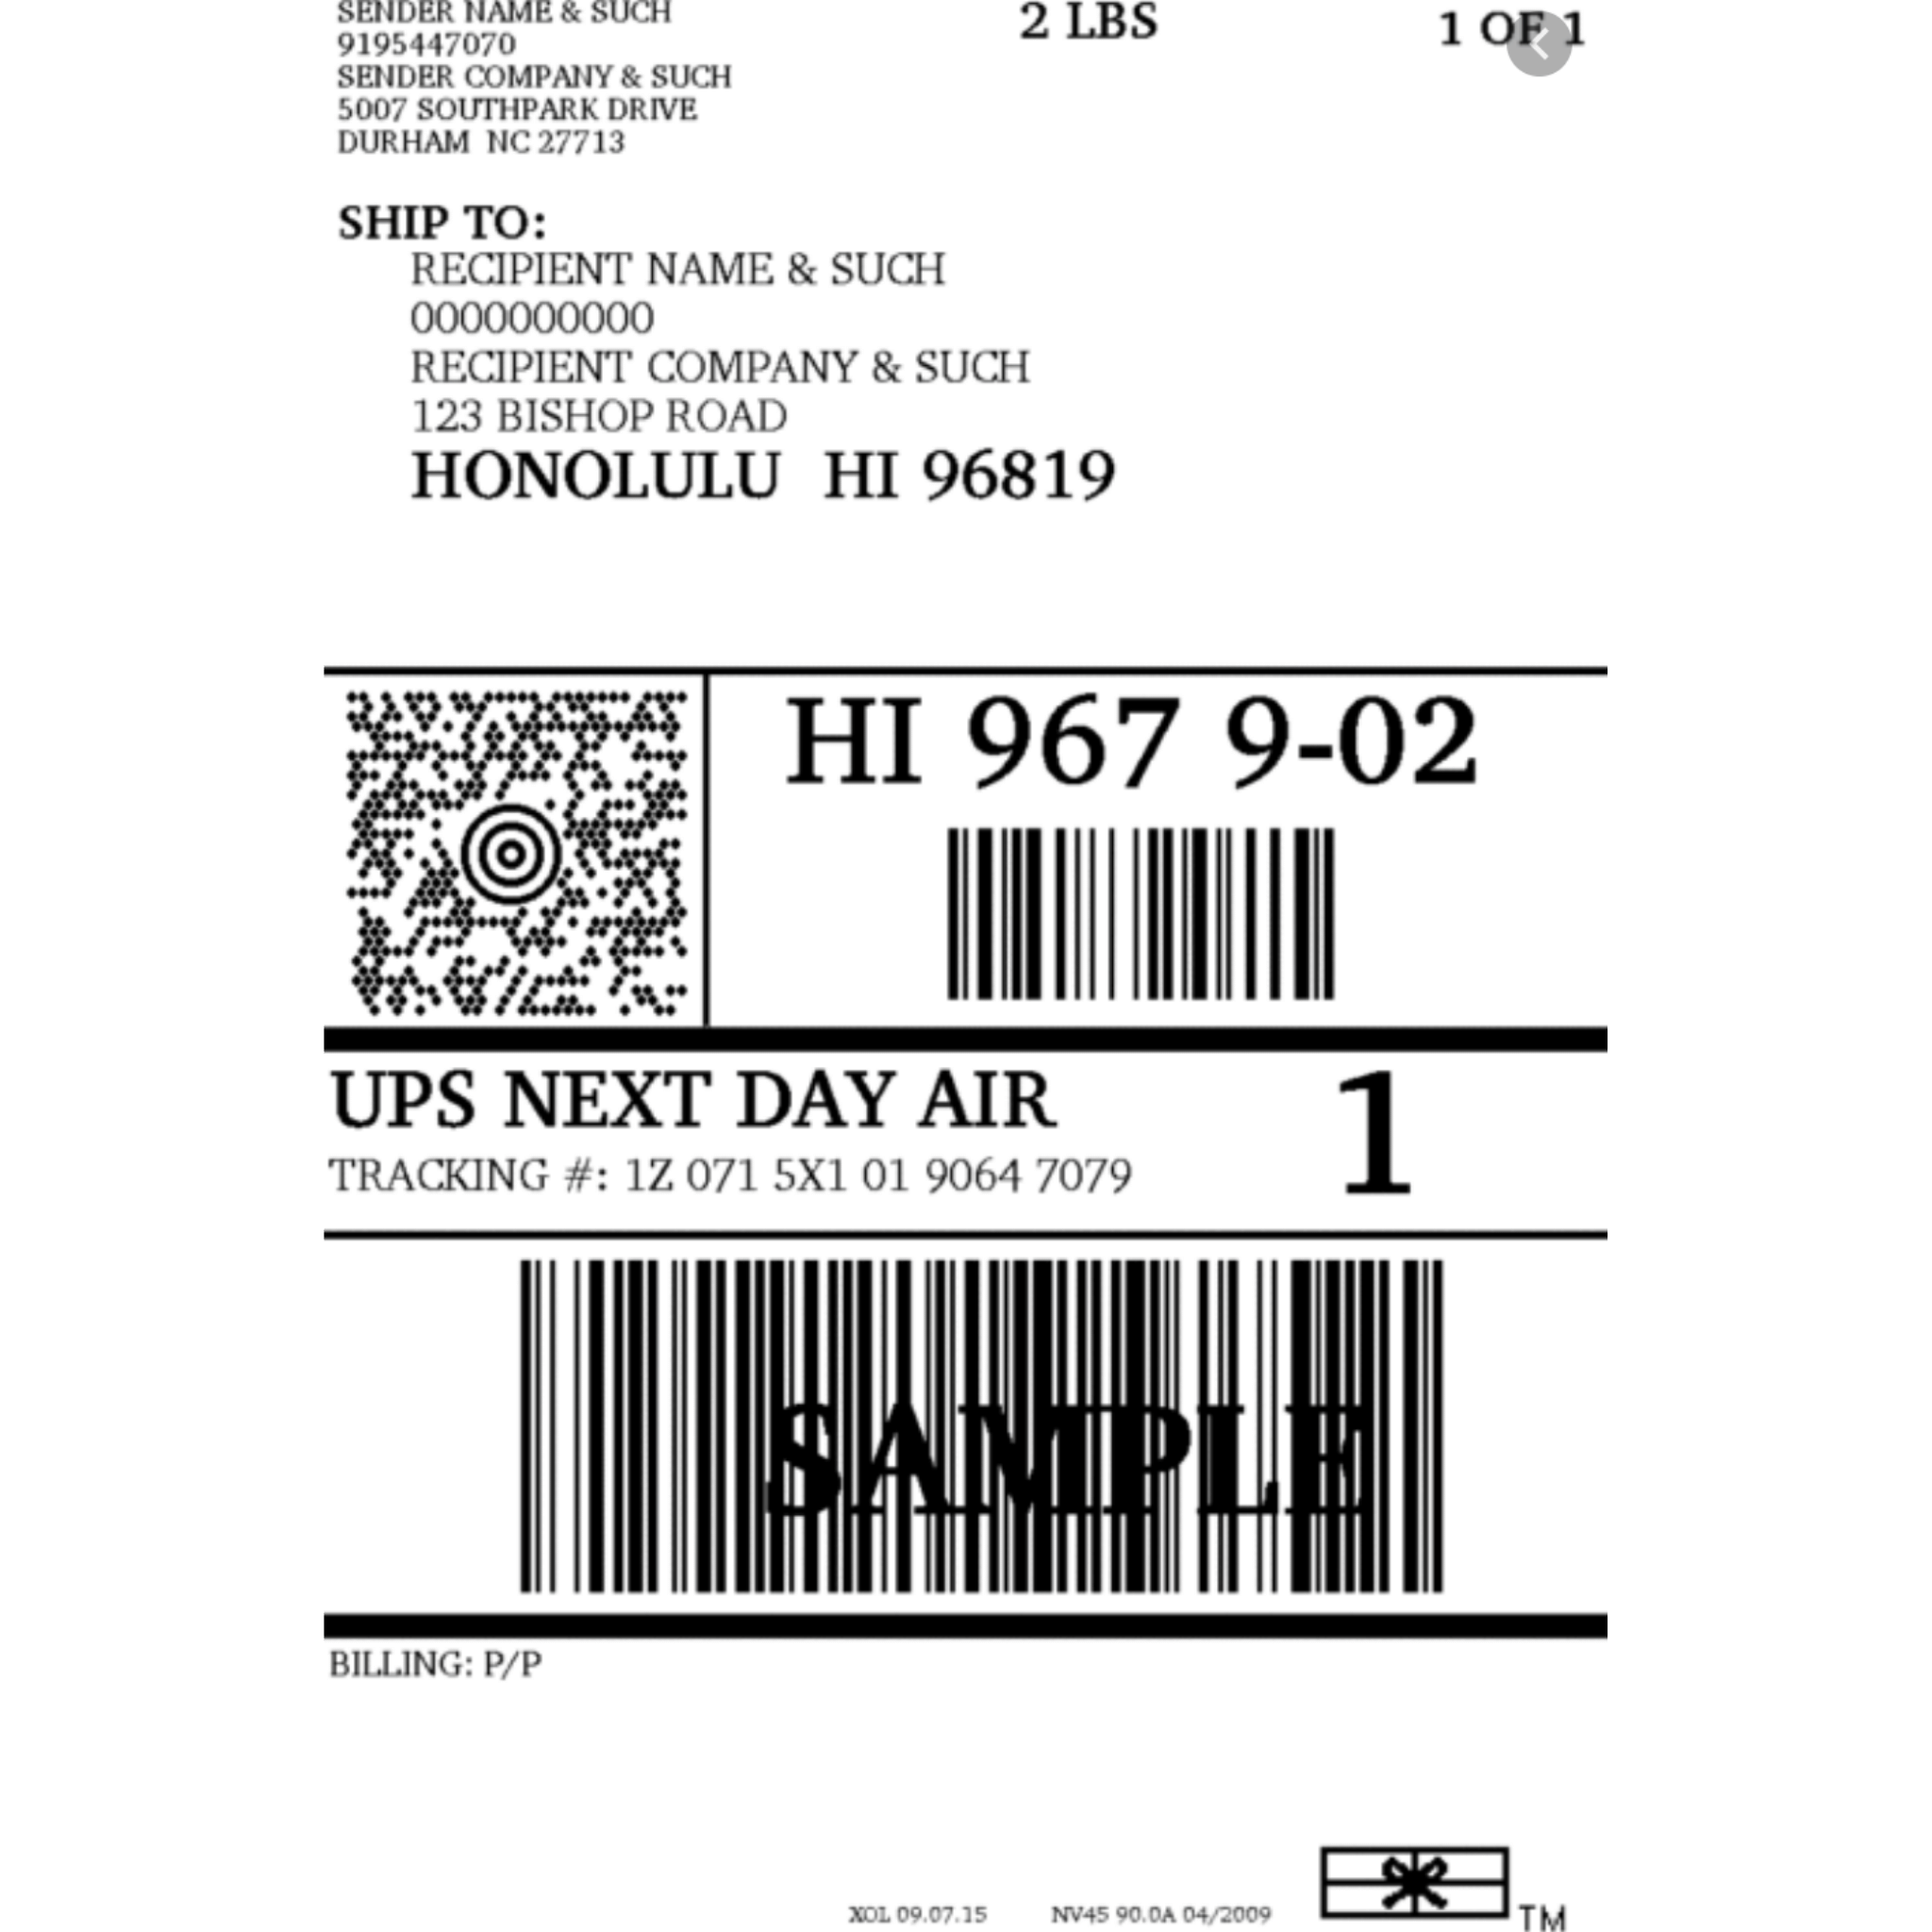 SOL Paddle Boards Shipping Label